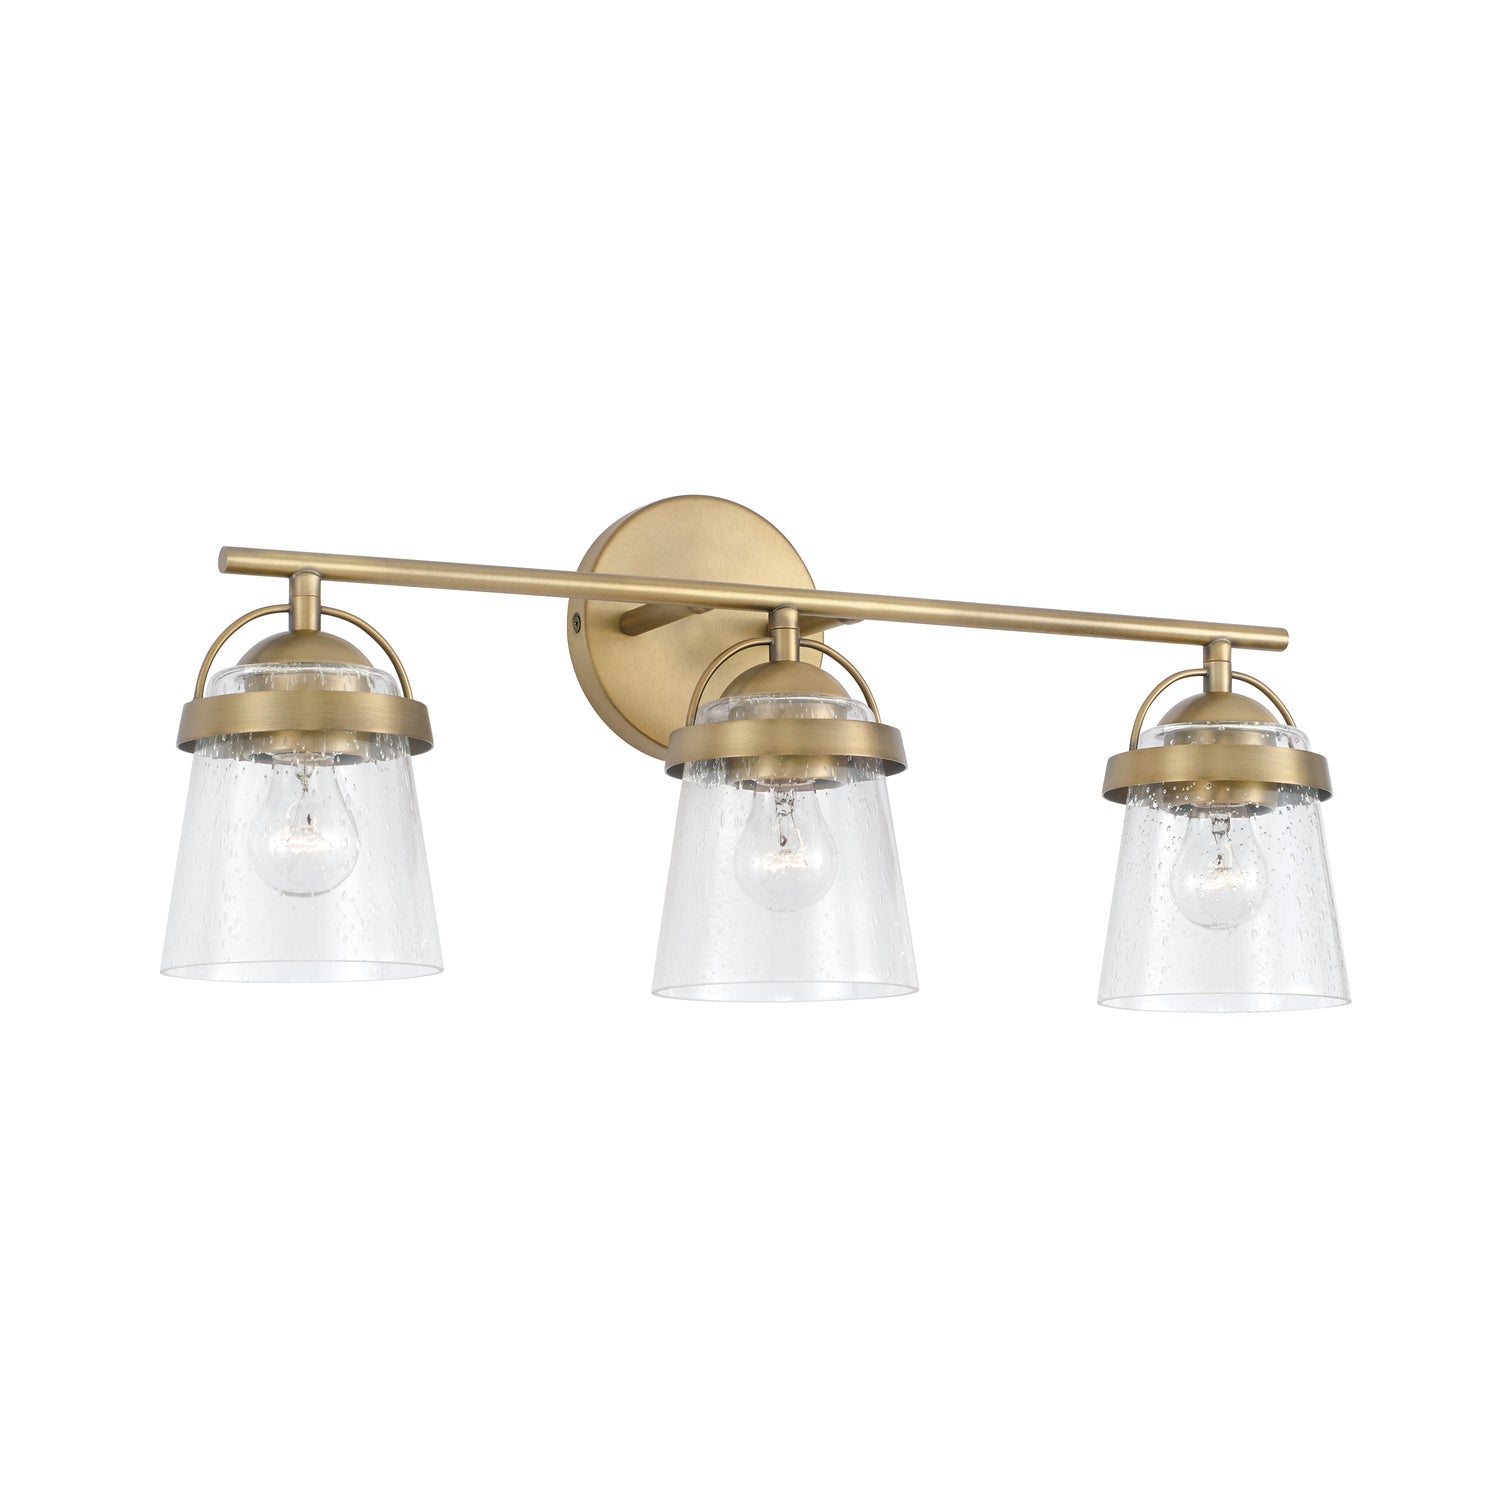 Capital Madison 147031AD-534 Bath Vanity Light 24 in. wide - Aged Brass